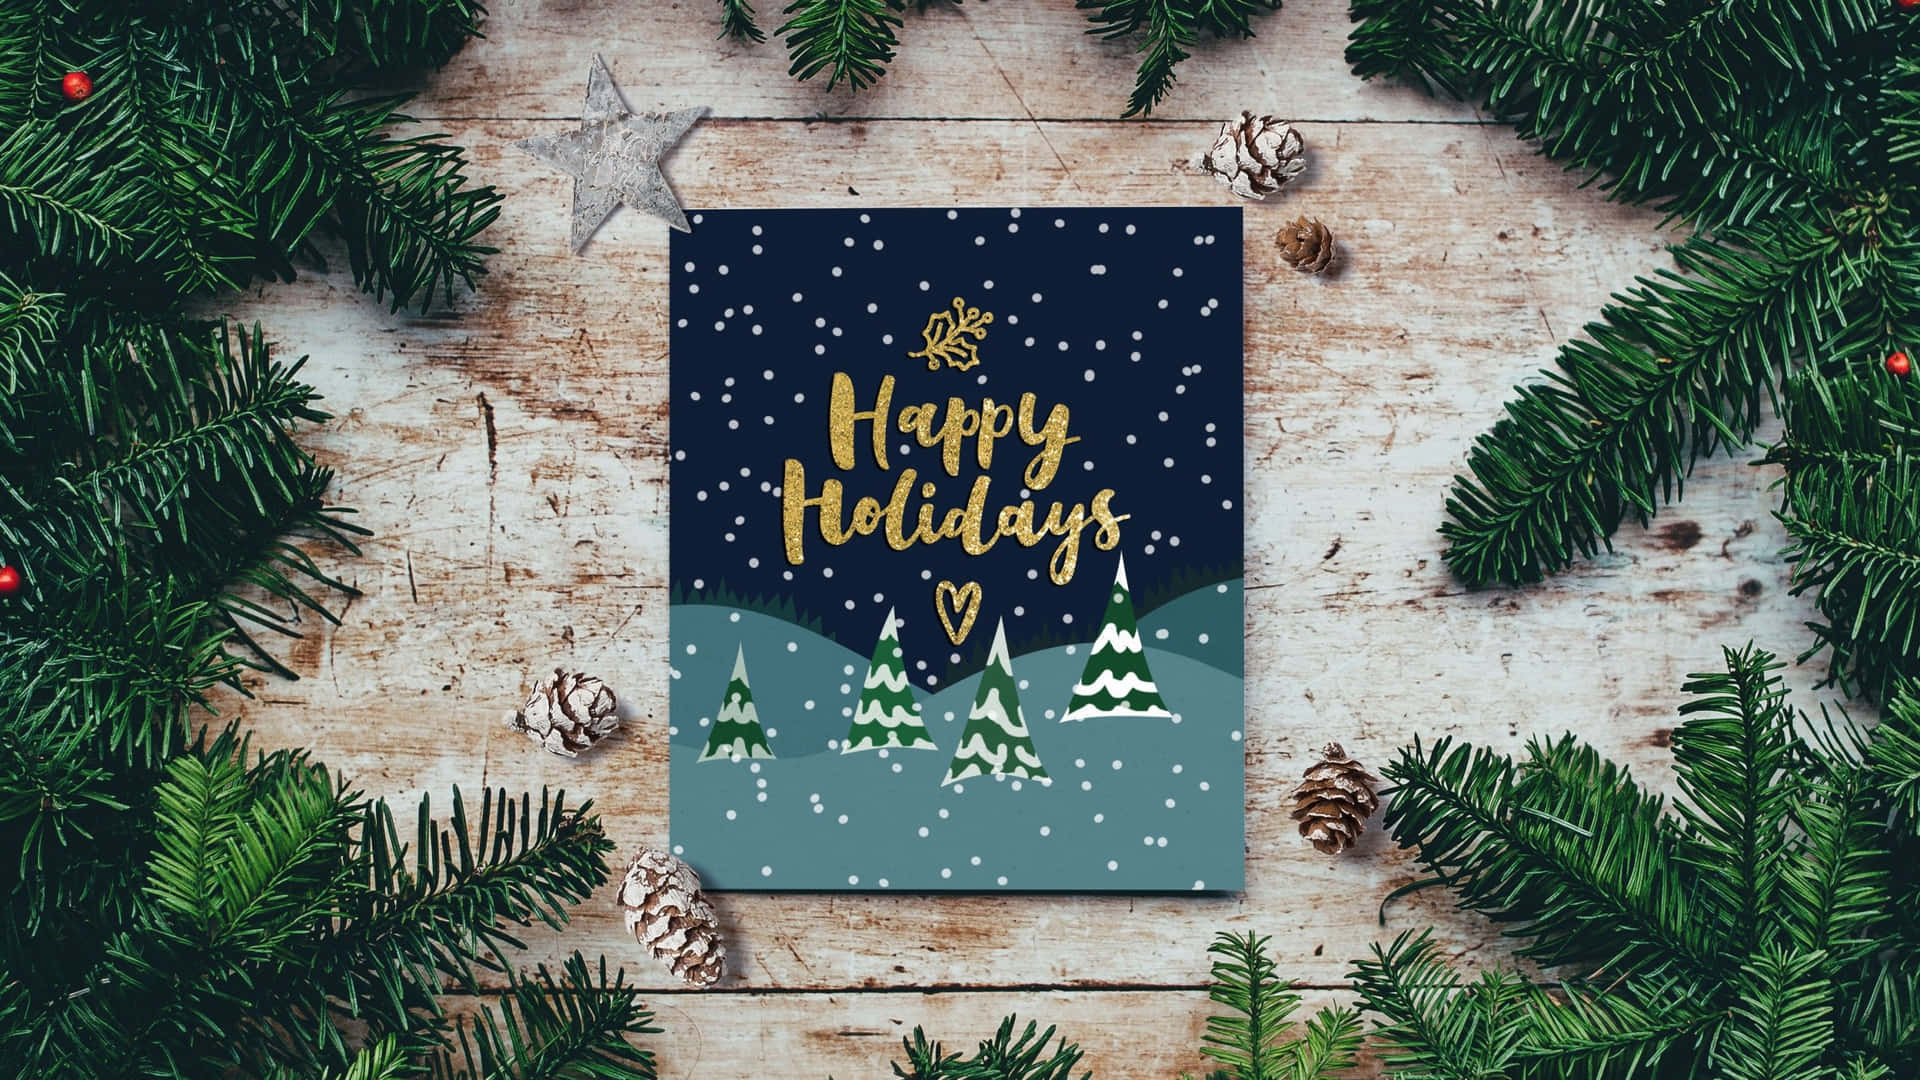 Festive Decorations Creating A Charming Happy Holidays Background